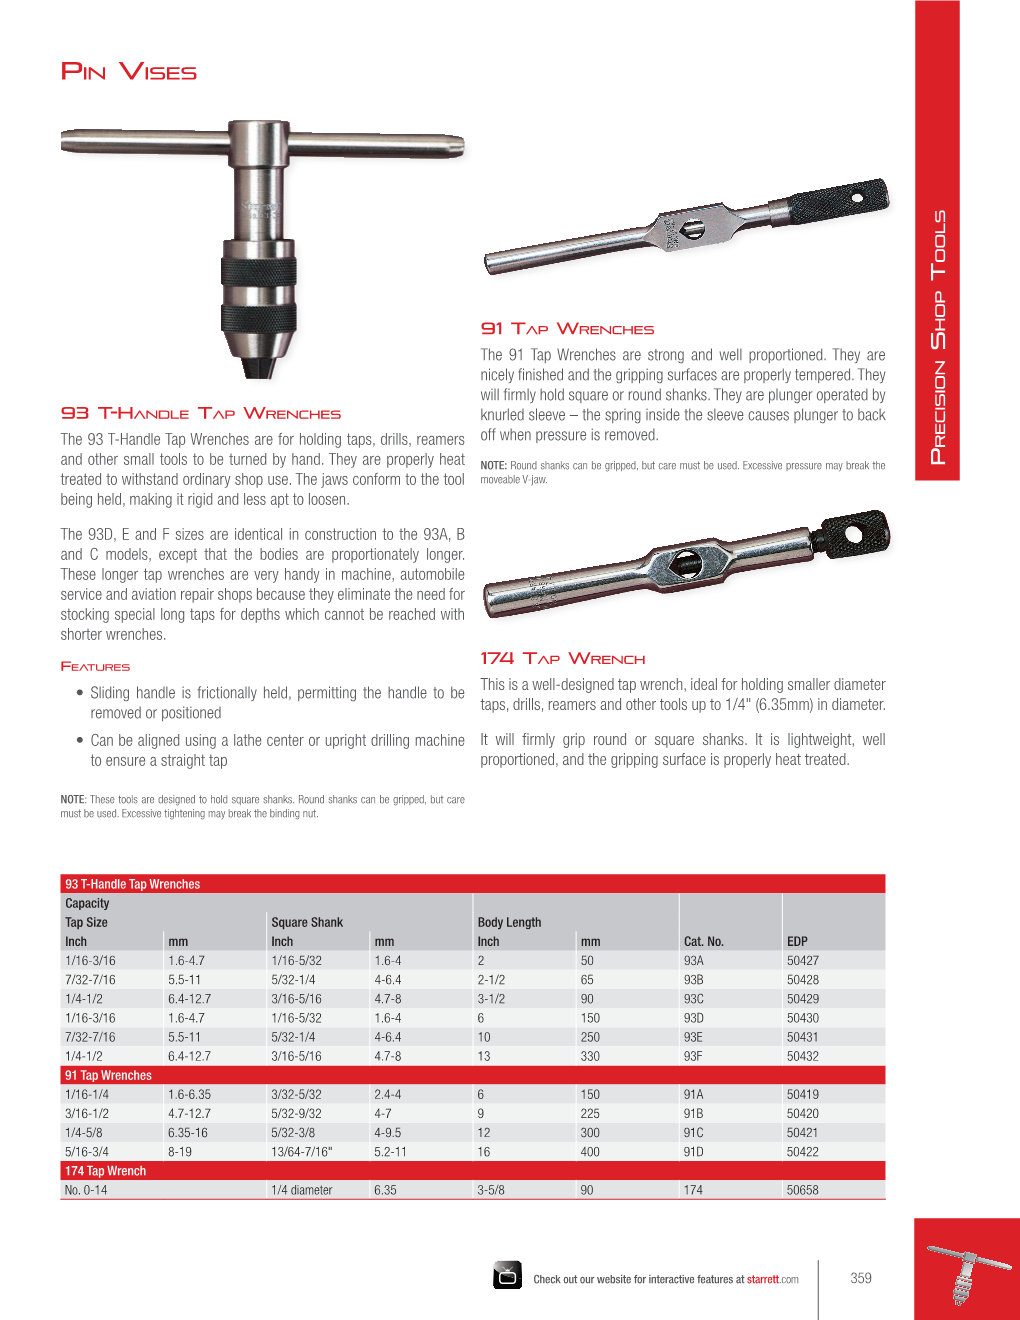 Pin Vises the 93 T-Handle Tap Wrenches Are for Holding Taps, Drills